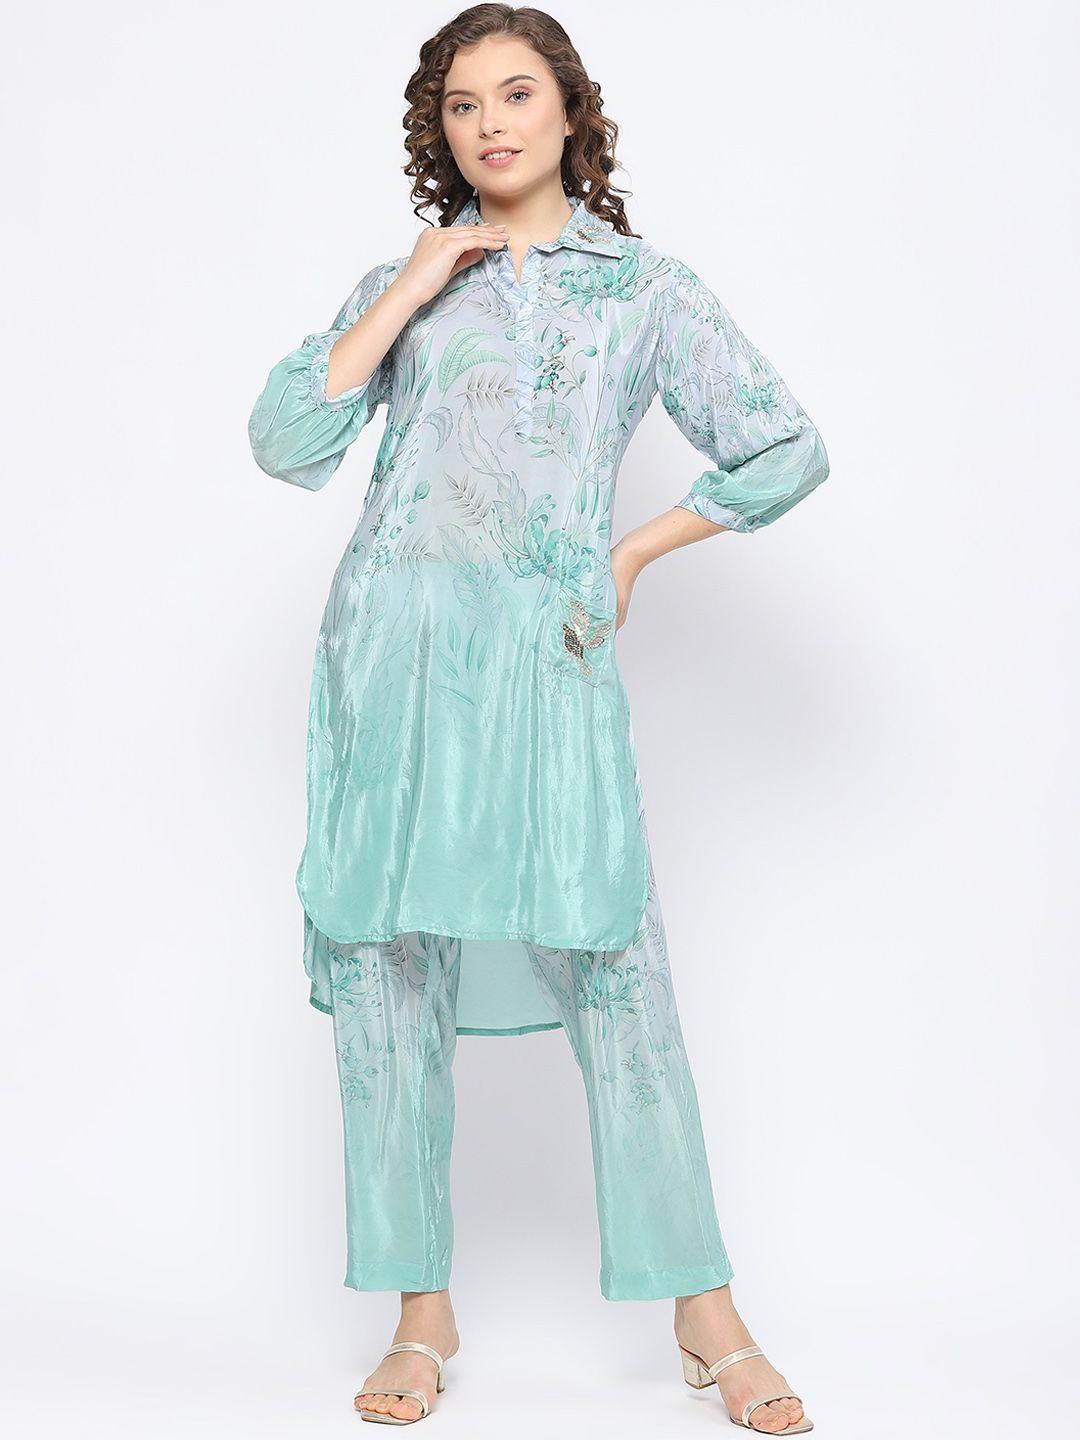 nh kapdewala floral printed pure cotton kurta with trousers